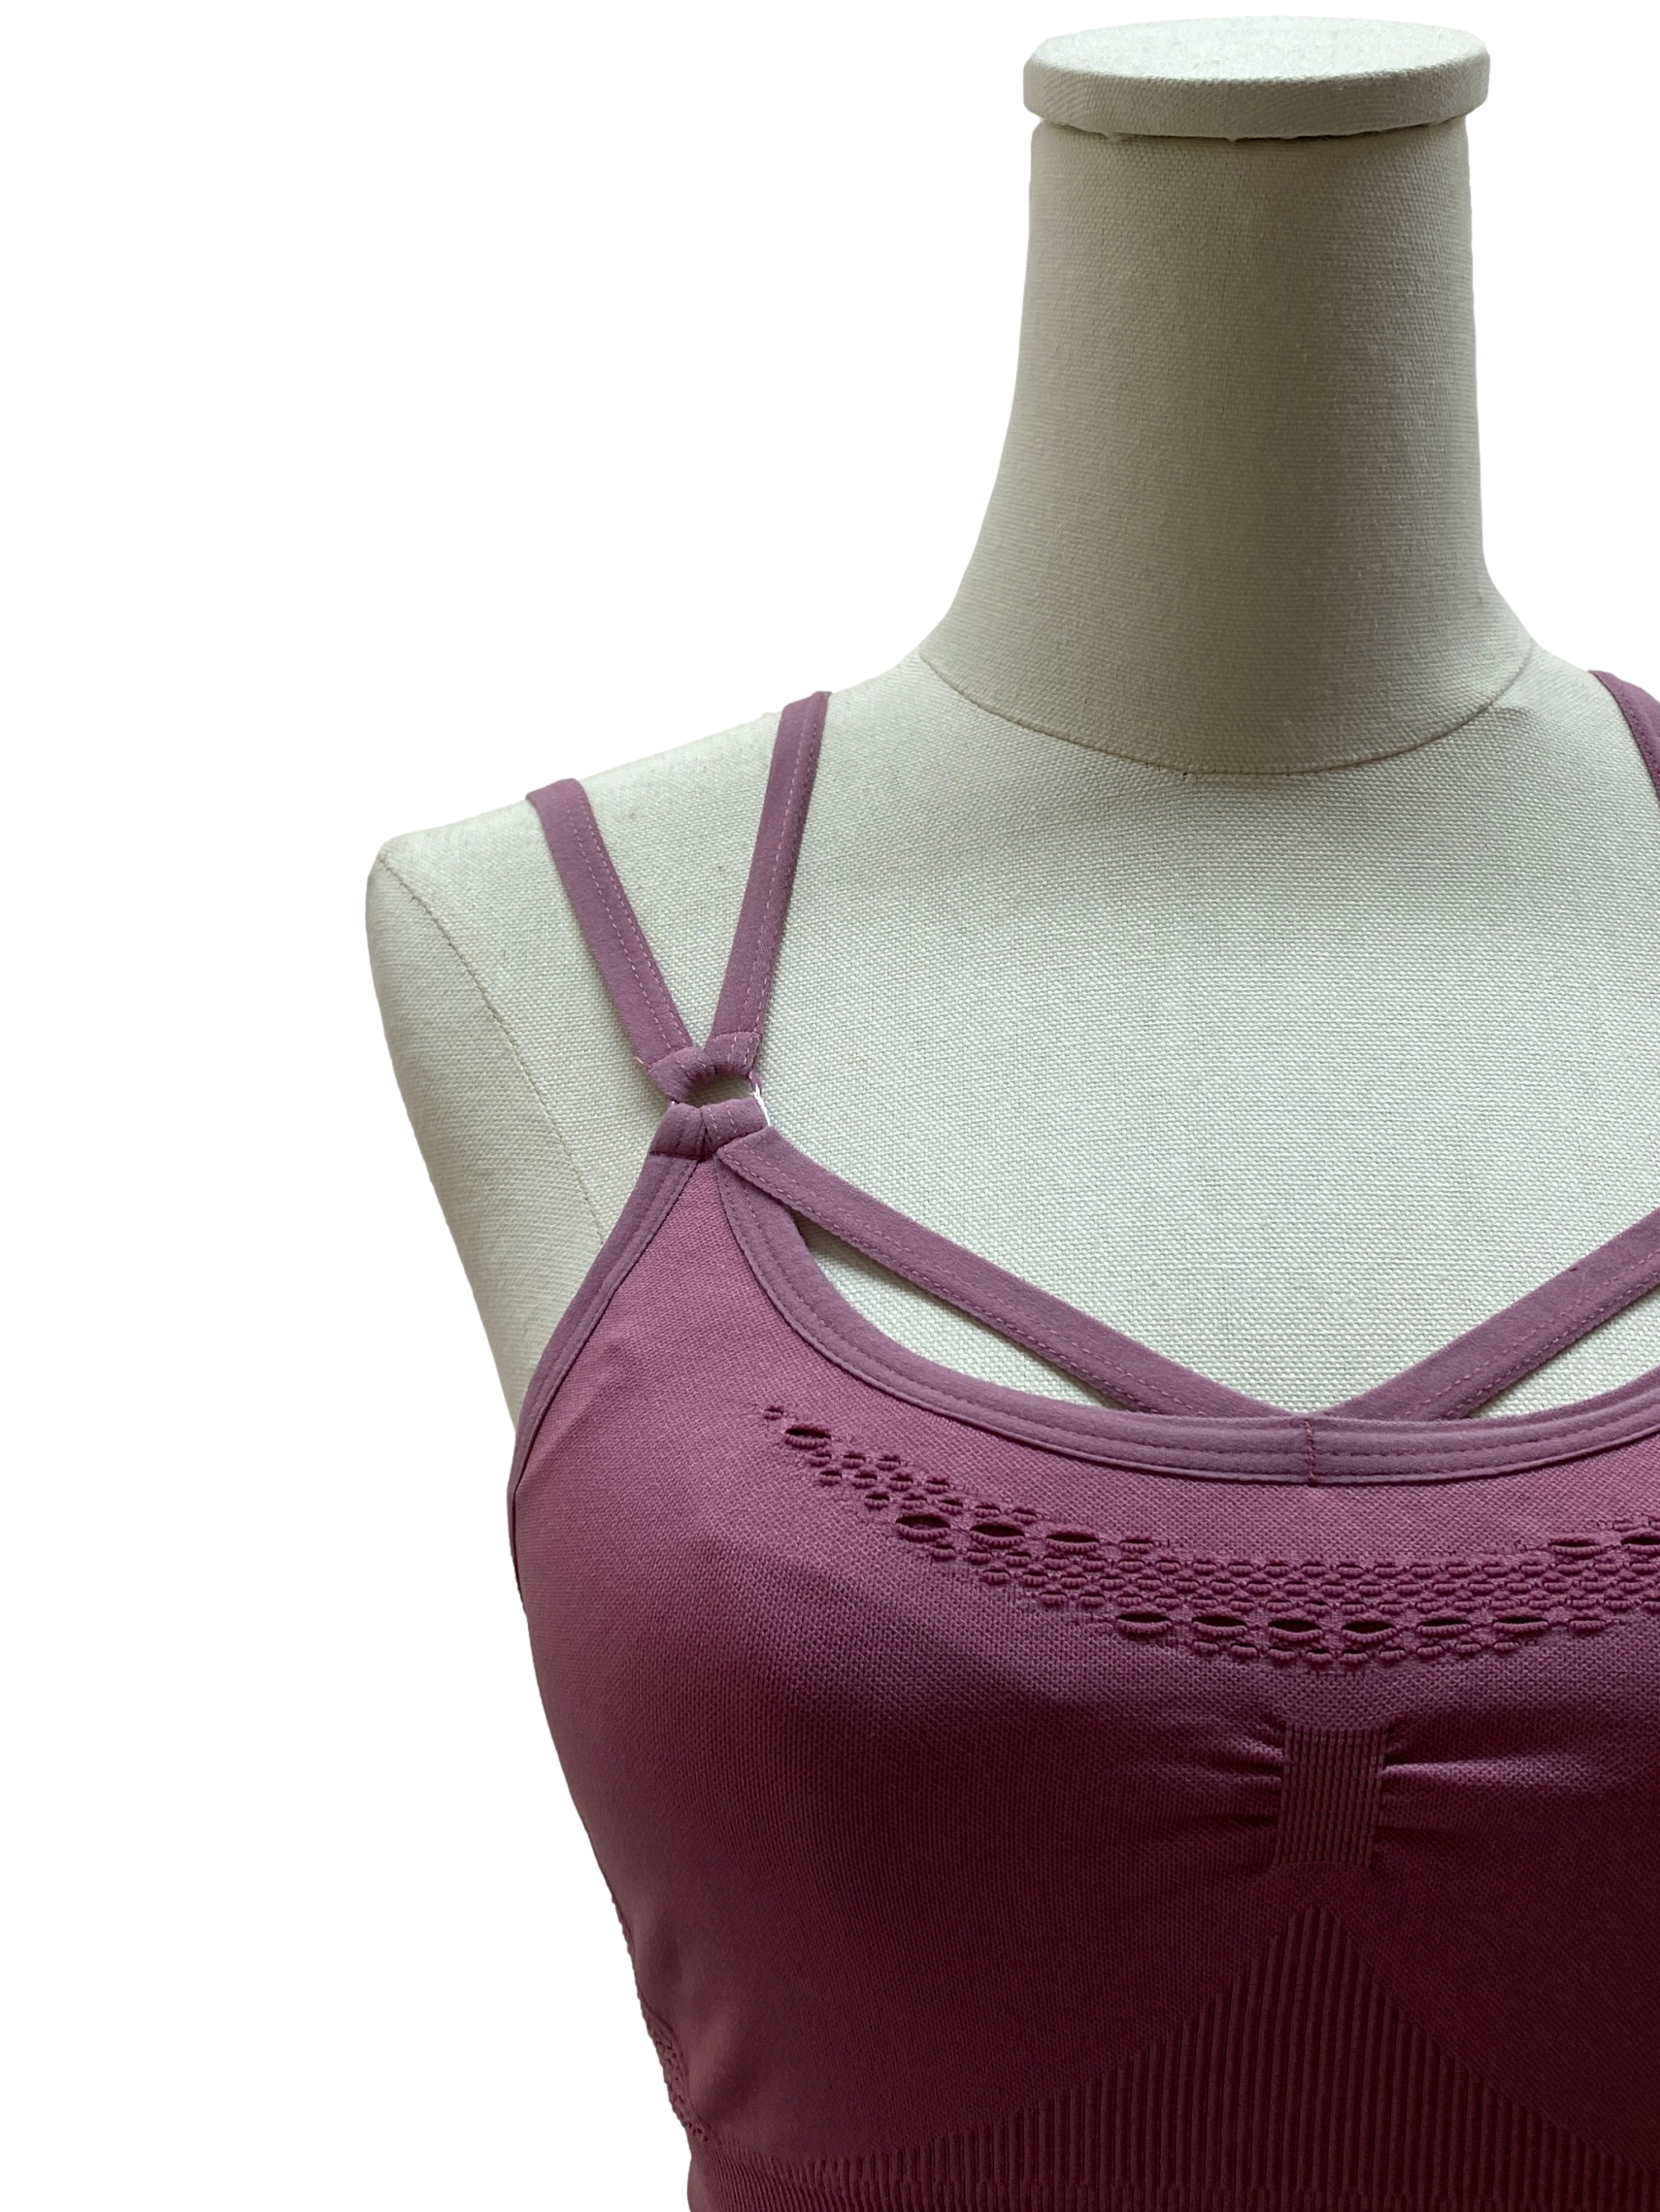 Mulberry Pink Sports Bra Tops